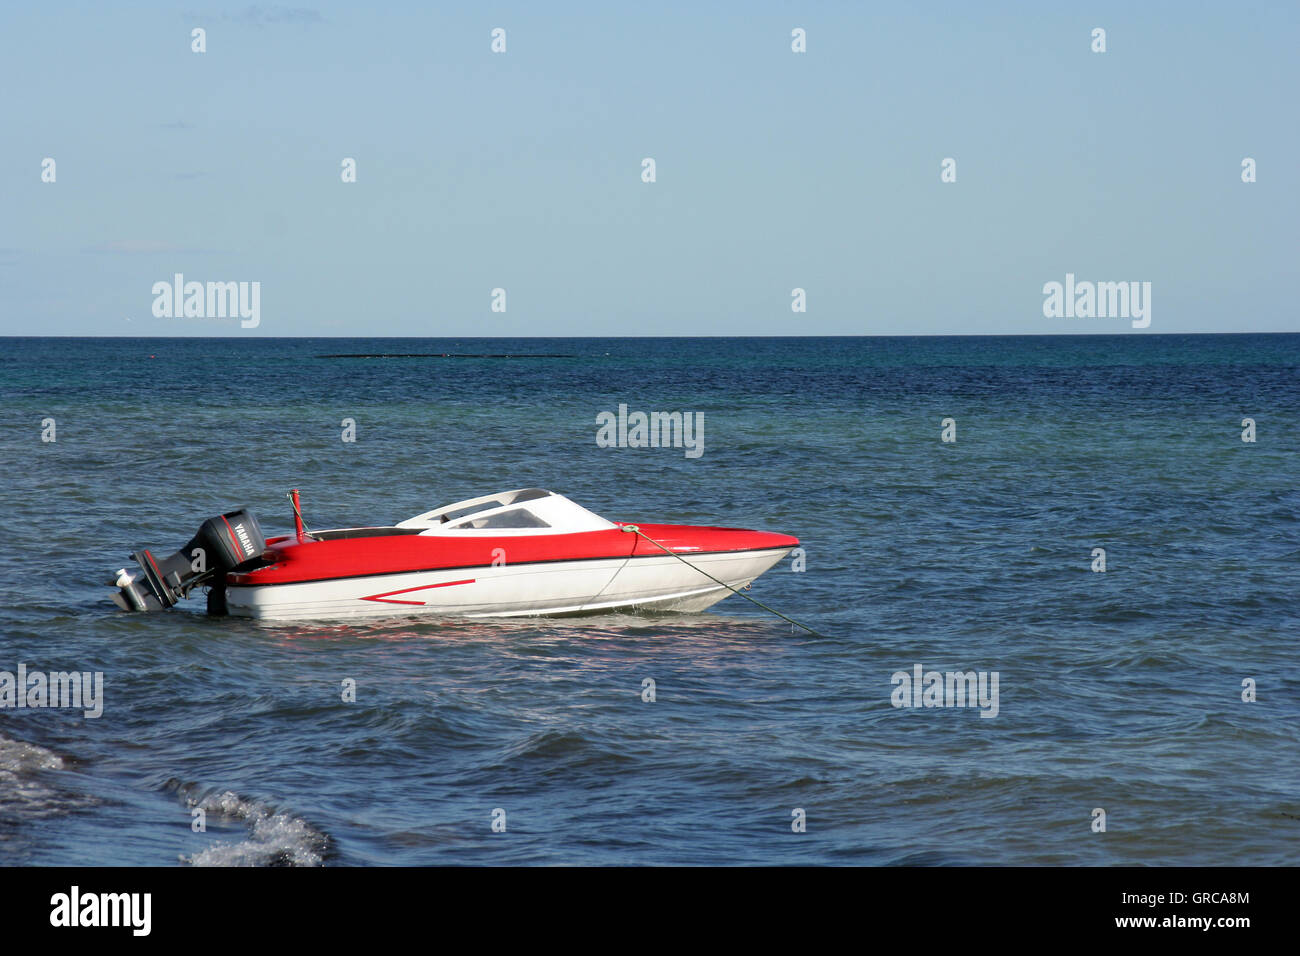 Red Motorboat On The Sea Stock Photo